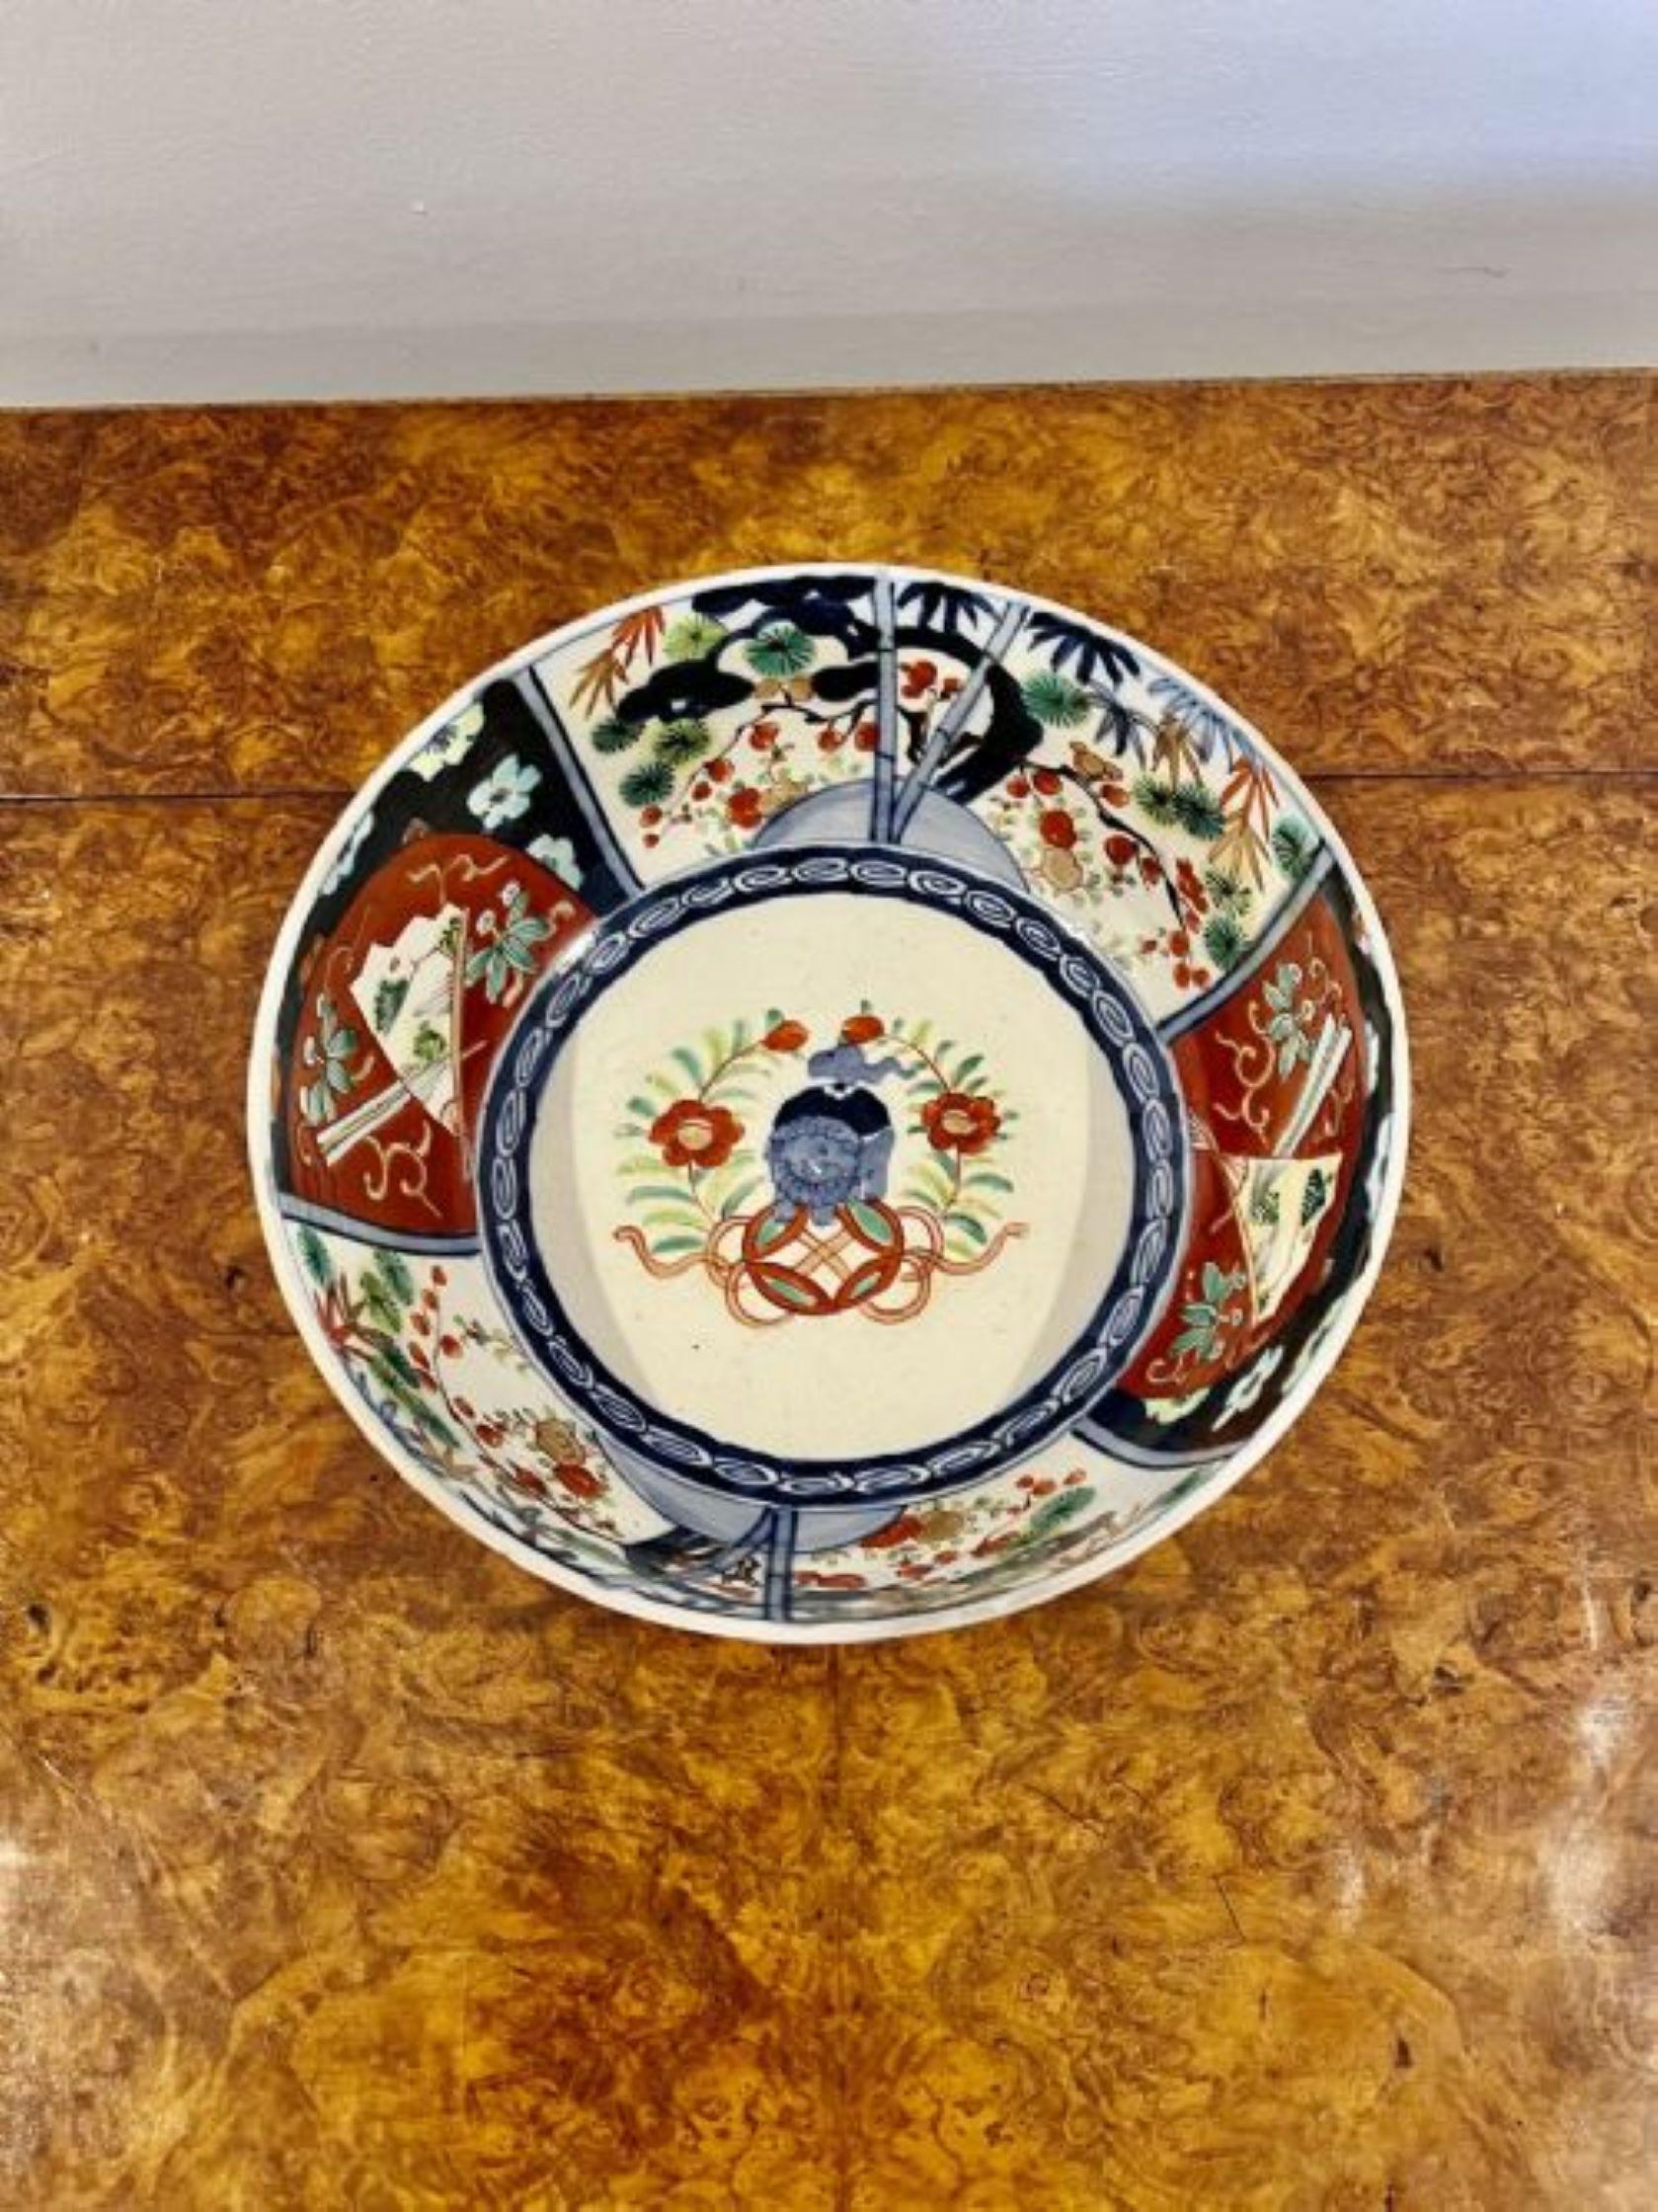 Lovely antique Japanese imari bowl having a lovely antique Japanese imari bowl with wonderful hand painted panels with leaves, trees and flowers in wonderful red, blue, green and white colours. 